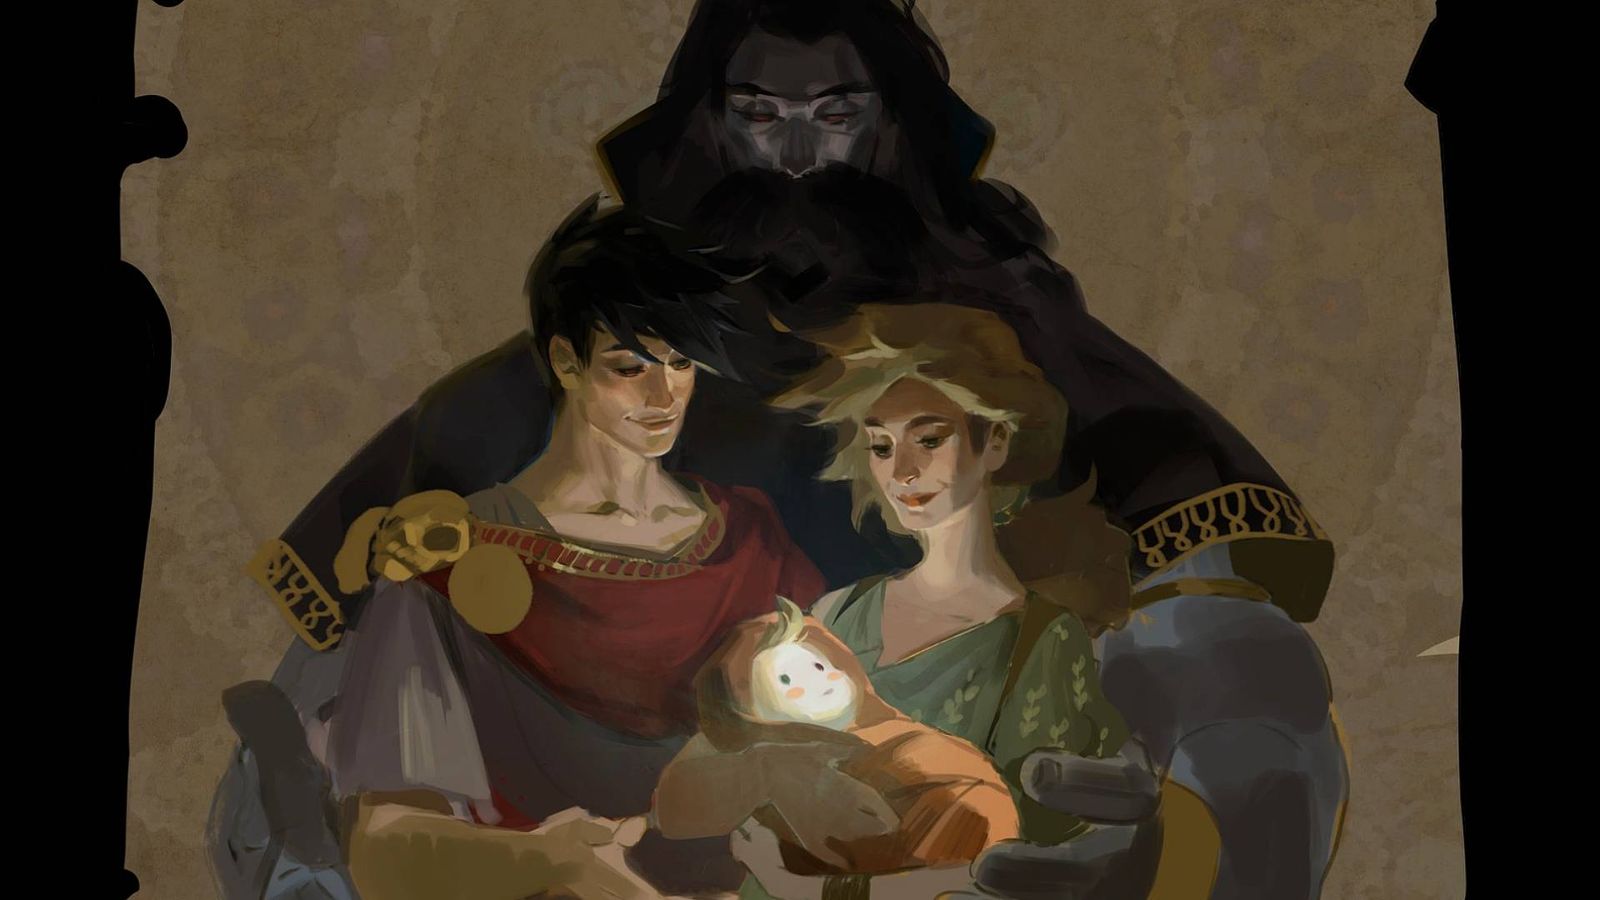 Melinoe as a baby, surrounded by Zagreus, Hades, and Persephone.